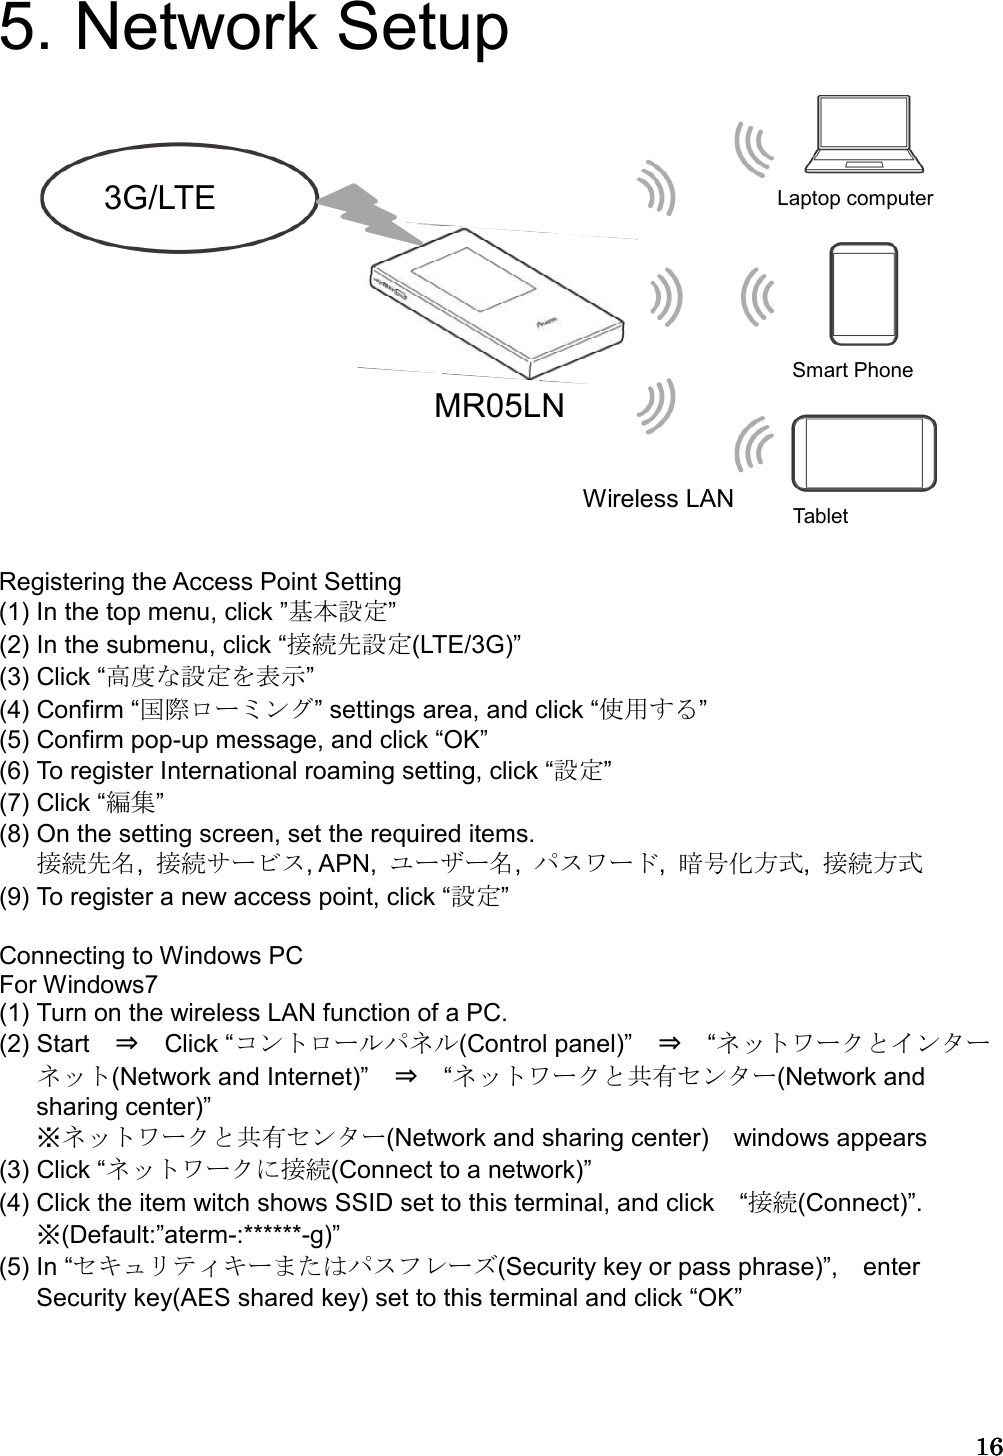 16161616   5. Network Setup     Registering the Access Point Setting (1) In the top menu, click ”基本設定” (2) In the submenu, click “接続先設定(LTE/3G)” (3) Click “高度な設定を表示” (4) Confirm “国際ローミング” settings area, and click “使用する”   (5) Confirm pop-up message, and click “OK” (6) To register International roaming setting, click “設定” (7) Click “編集”   (8) On the setting screen, set the required items. 接続先名,  接続サービス, APN,  ユーザー名,  パスワード,  暗号化方式,  接続方式 (9) To register a new access point, click “設定”  Connecting to Windows PC For Windows7 (1) Turn on the wireless LAN function of a PC. (2) Start ⇒ Click “コントロールパネル(Control panel)” ⇒ “ネットワークとインターネット(Network and Internet)” ⇒ “ネットワークと共有センター(Network and sharing center)” ※ネットワークと共有センター(Network and sharing center) windows appears (3) Click “ネットワークに接続(Connect to a network)”  (4) Click the item witch shows SSID set to this terminal, and click    “接続(Connect)”. ※(Default:”aterm-:******-g)” (5) In “セキュリティキーまたはパスフレーズ(Security key or pass phrase)”, enter Security key(AES shared key) set to this terminal and click “OK”      Wireless LAN ２G 3G/LTE MR05LN Laptop computer Smart Phone Tablet  